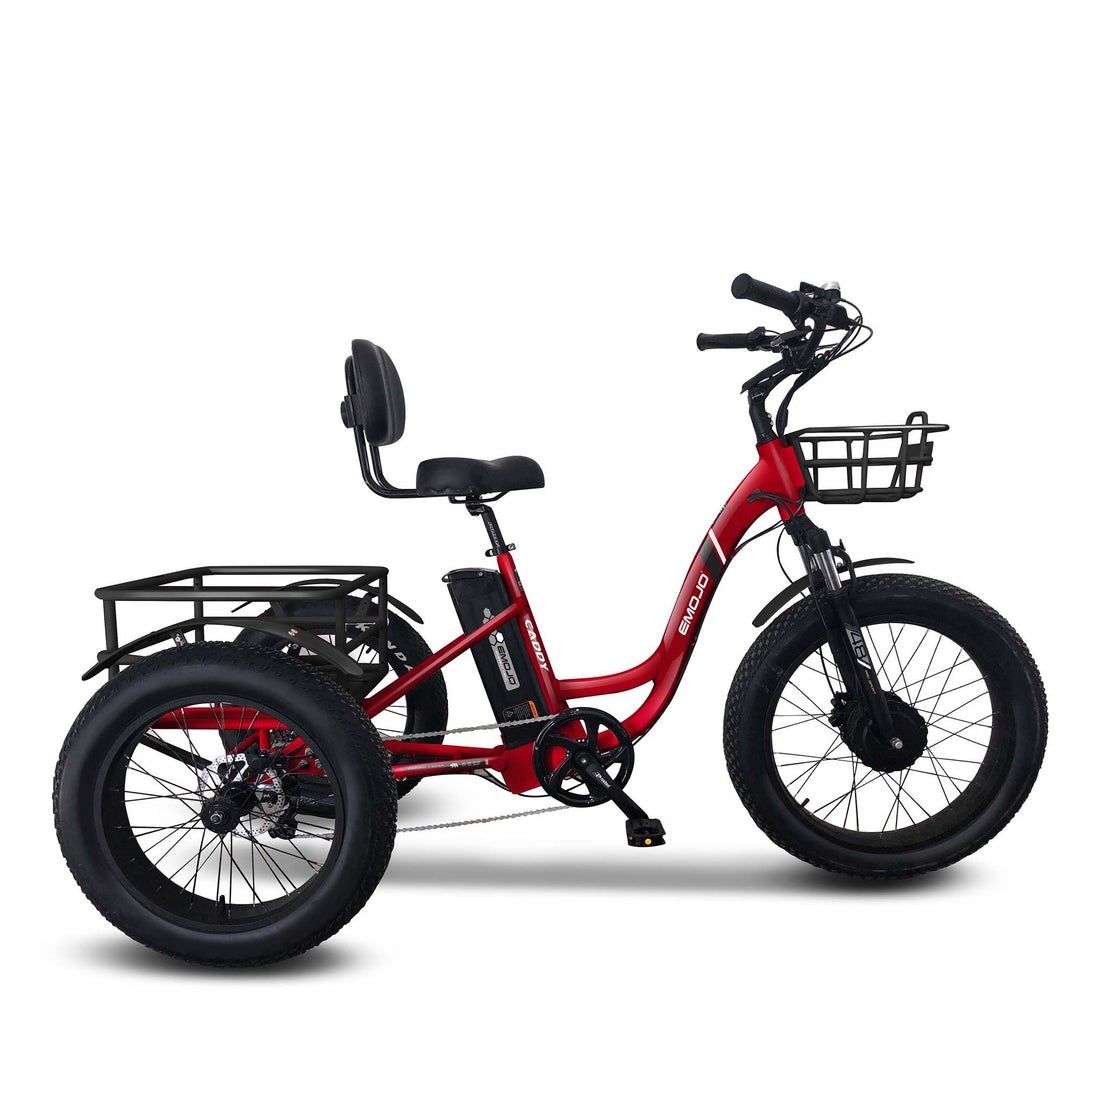 EMOJO CADDY PRO ELECTRIC TRICYCLE